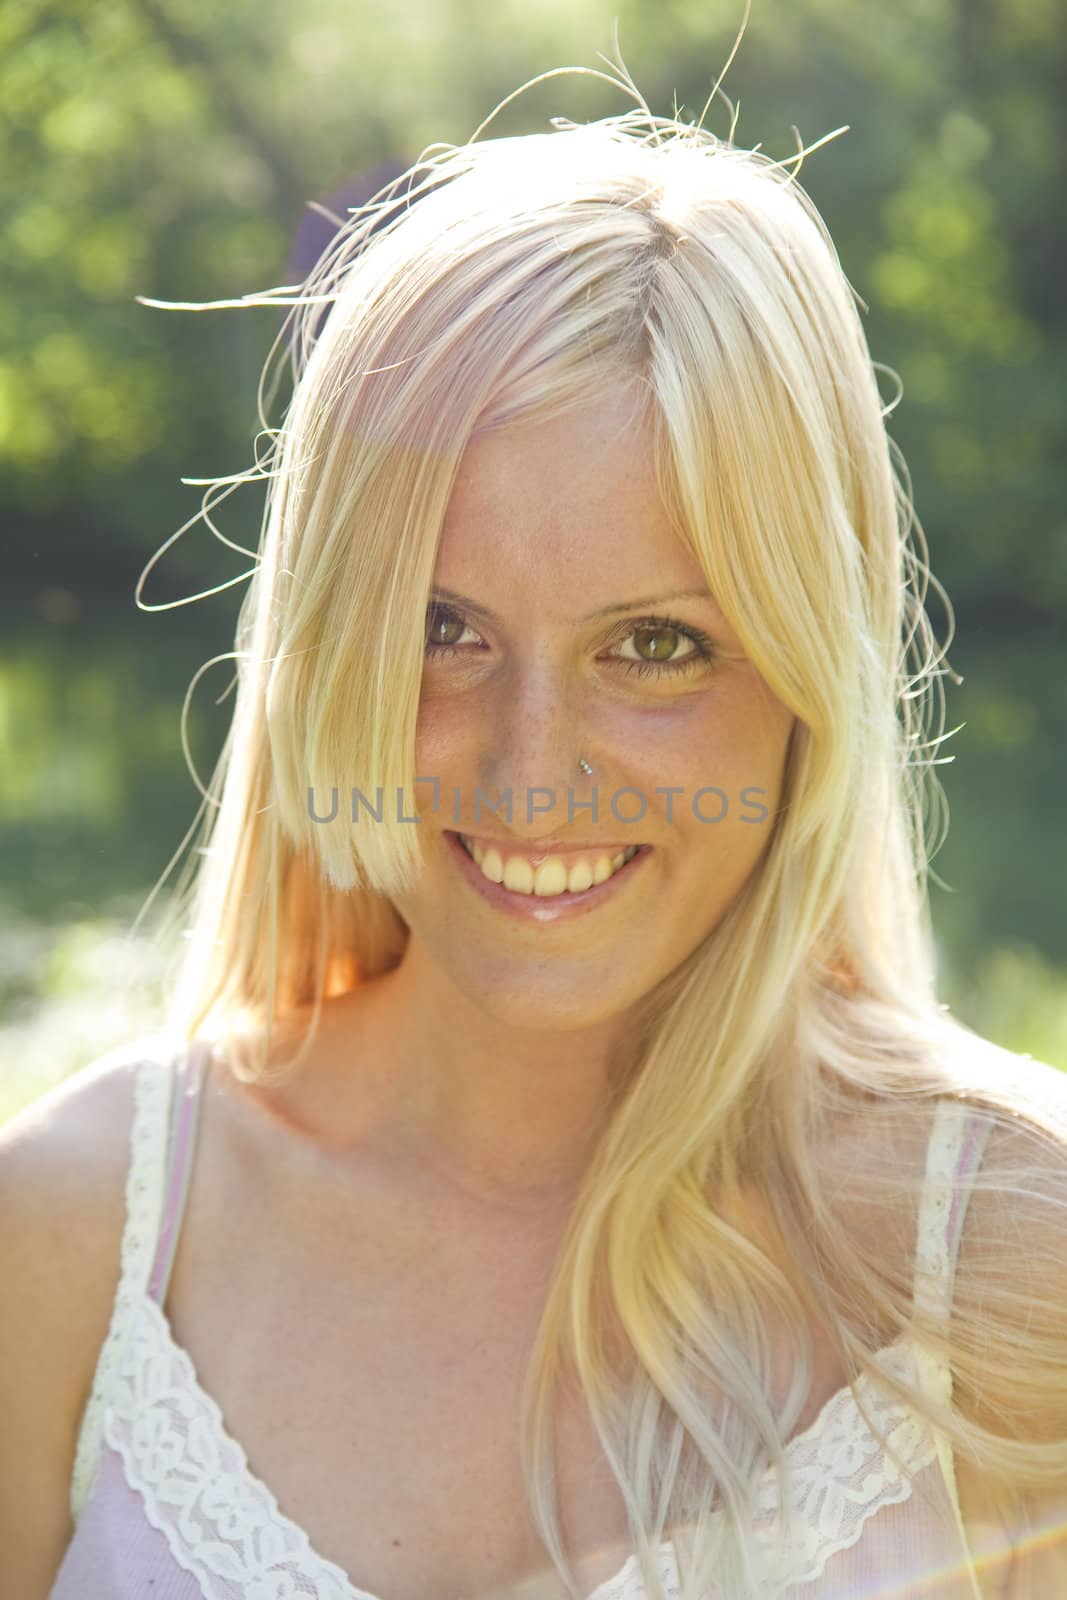 Beautiful blond woman smiling and resting in green environment